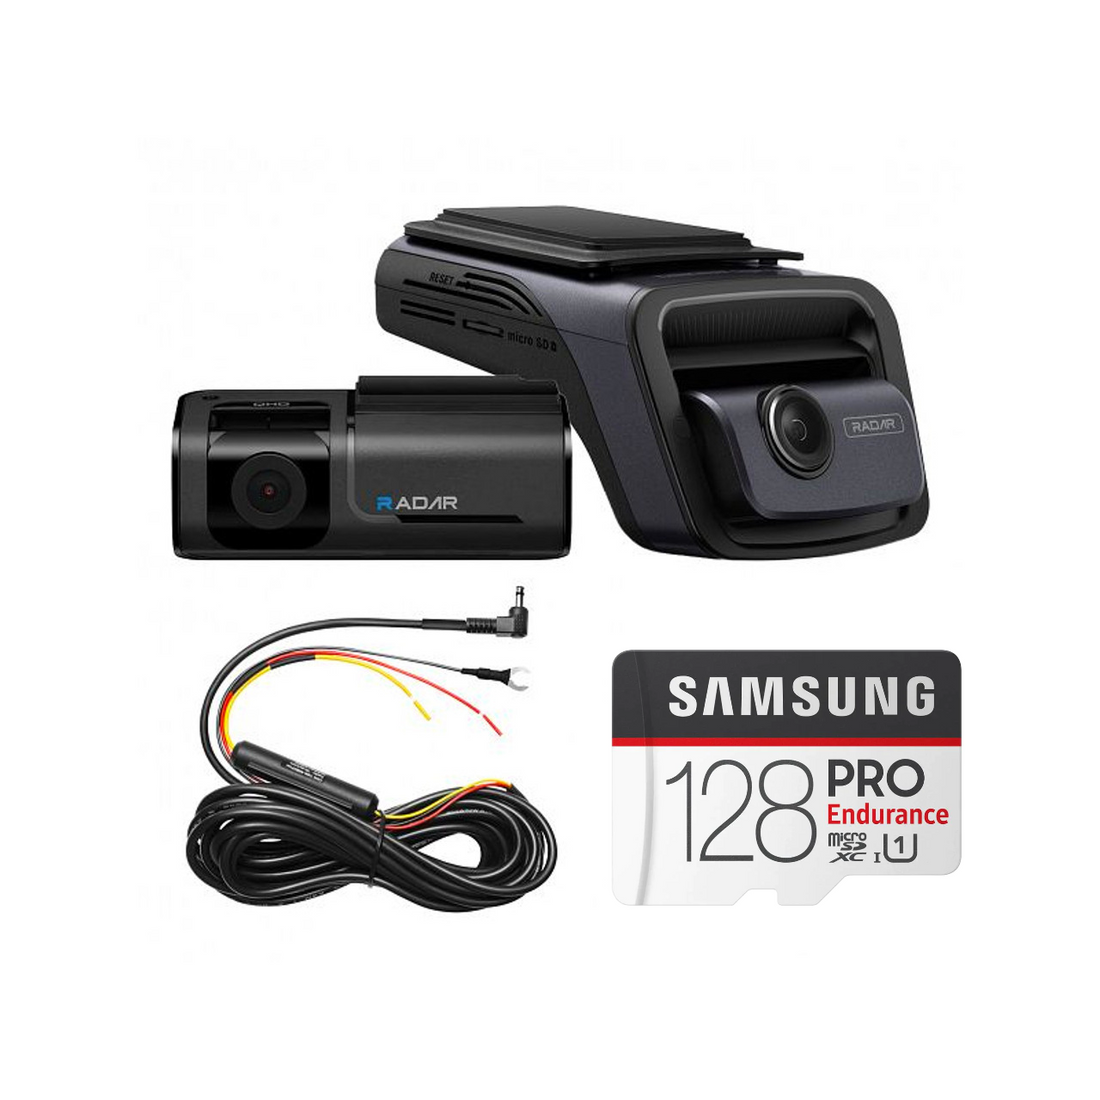 Upgrade Your Dash Cam Experience with Thinkware U3000 4K Dual Radar - Free 128GB upgrade only at Dashcam Specialists